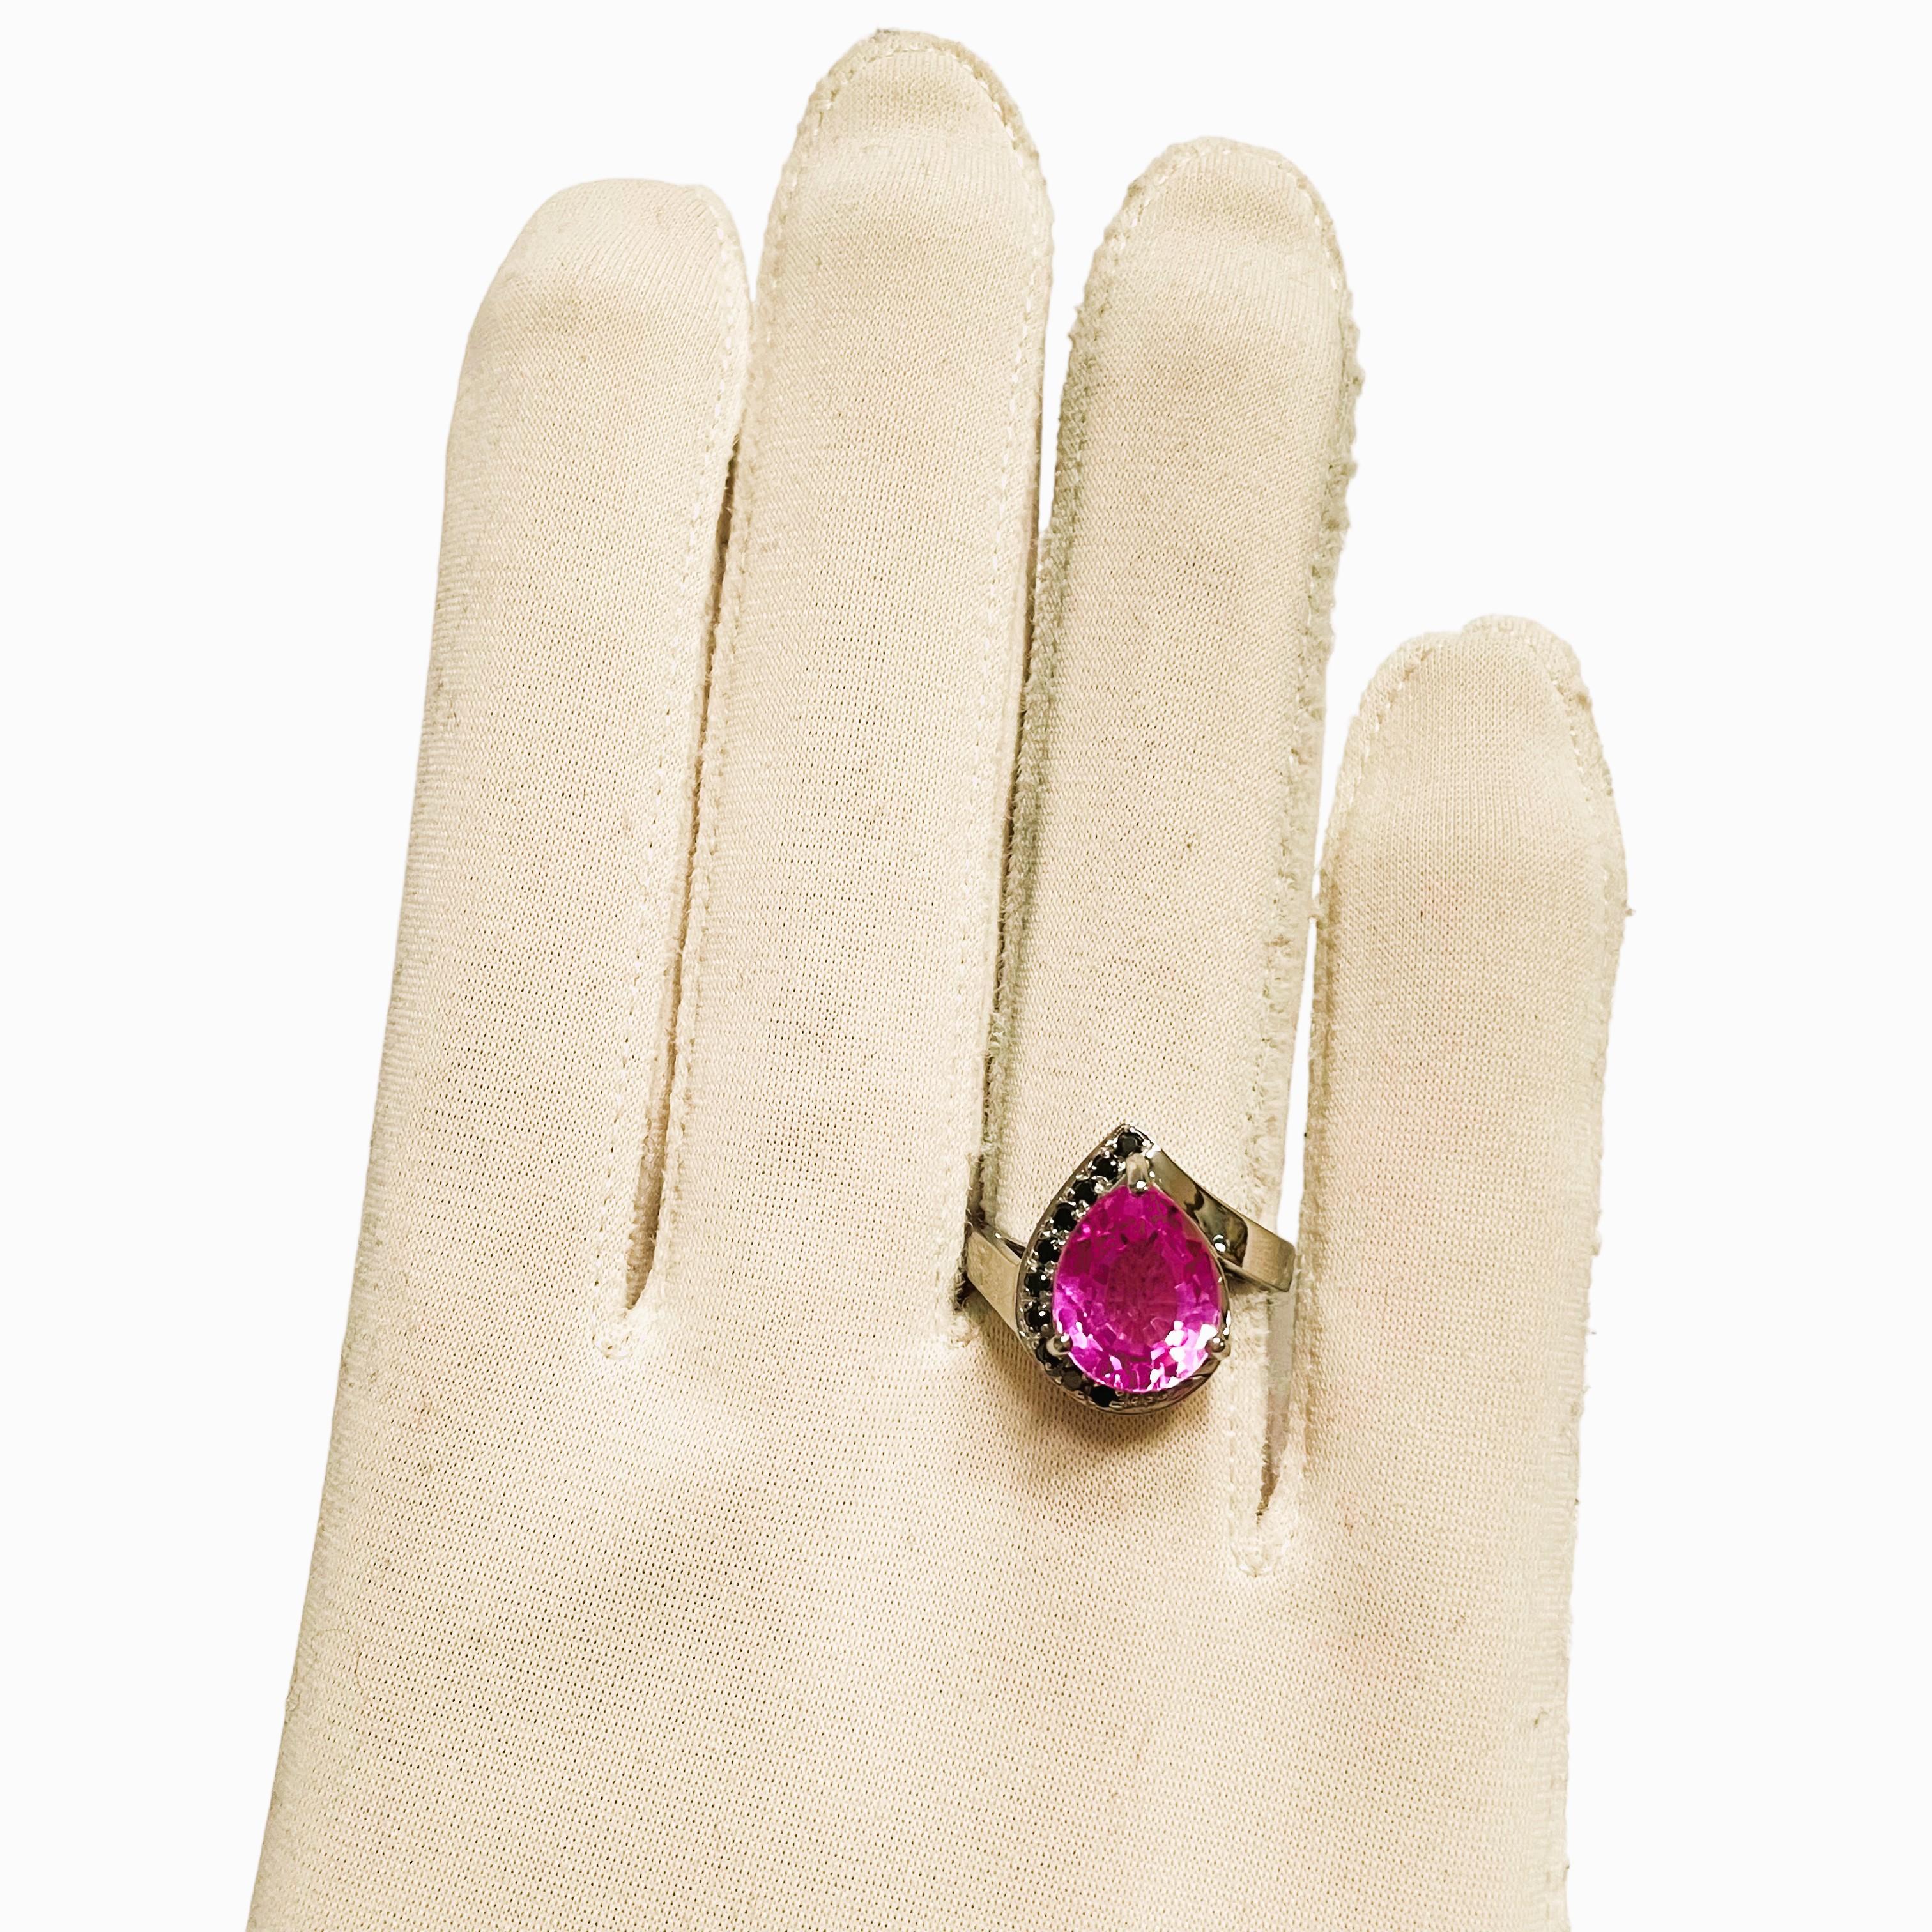 New African If Platinum Pink Tourmaline & Black Spinel Sterling Ring 4